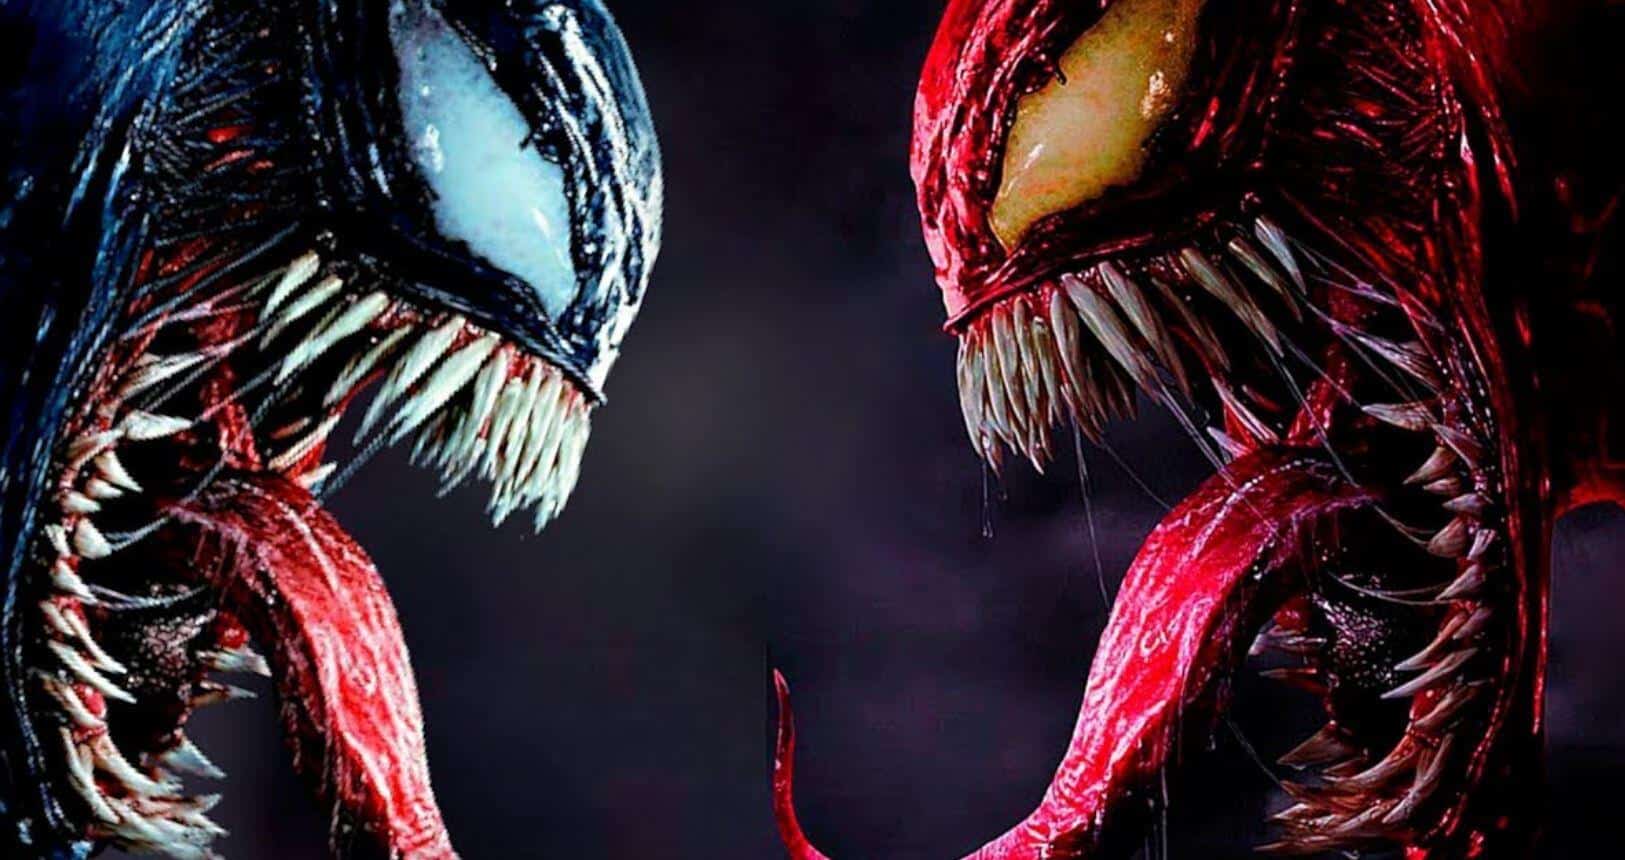 Venom 2' Trailer Has Apparently Leaked Online Ahead Of Upcoming Release